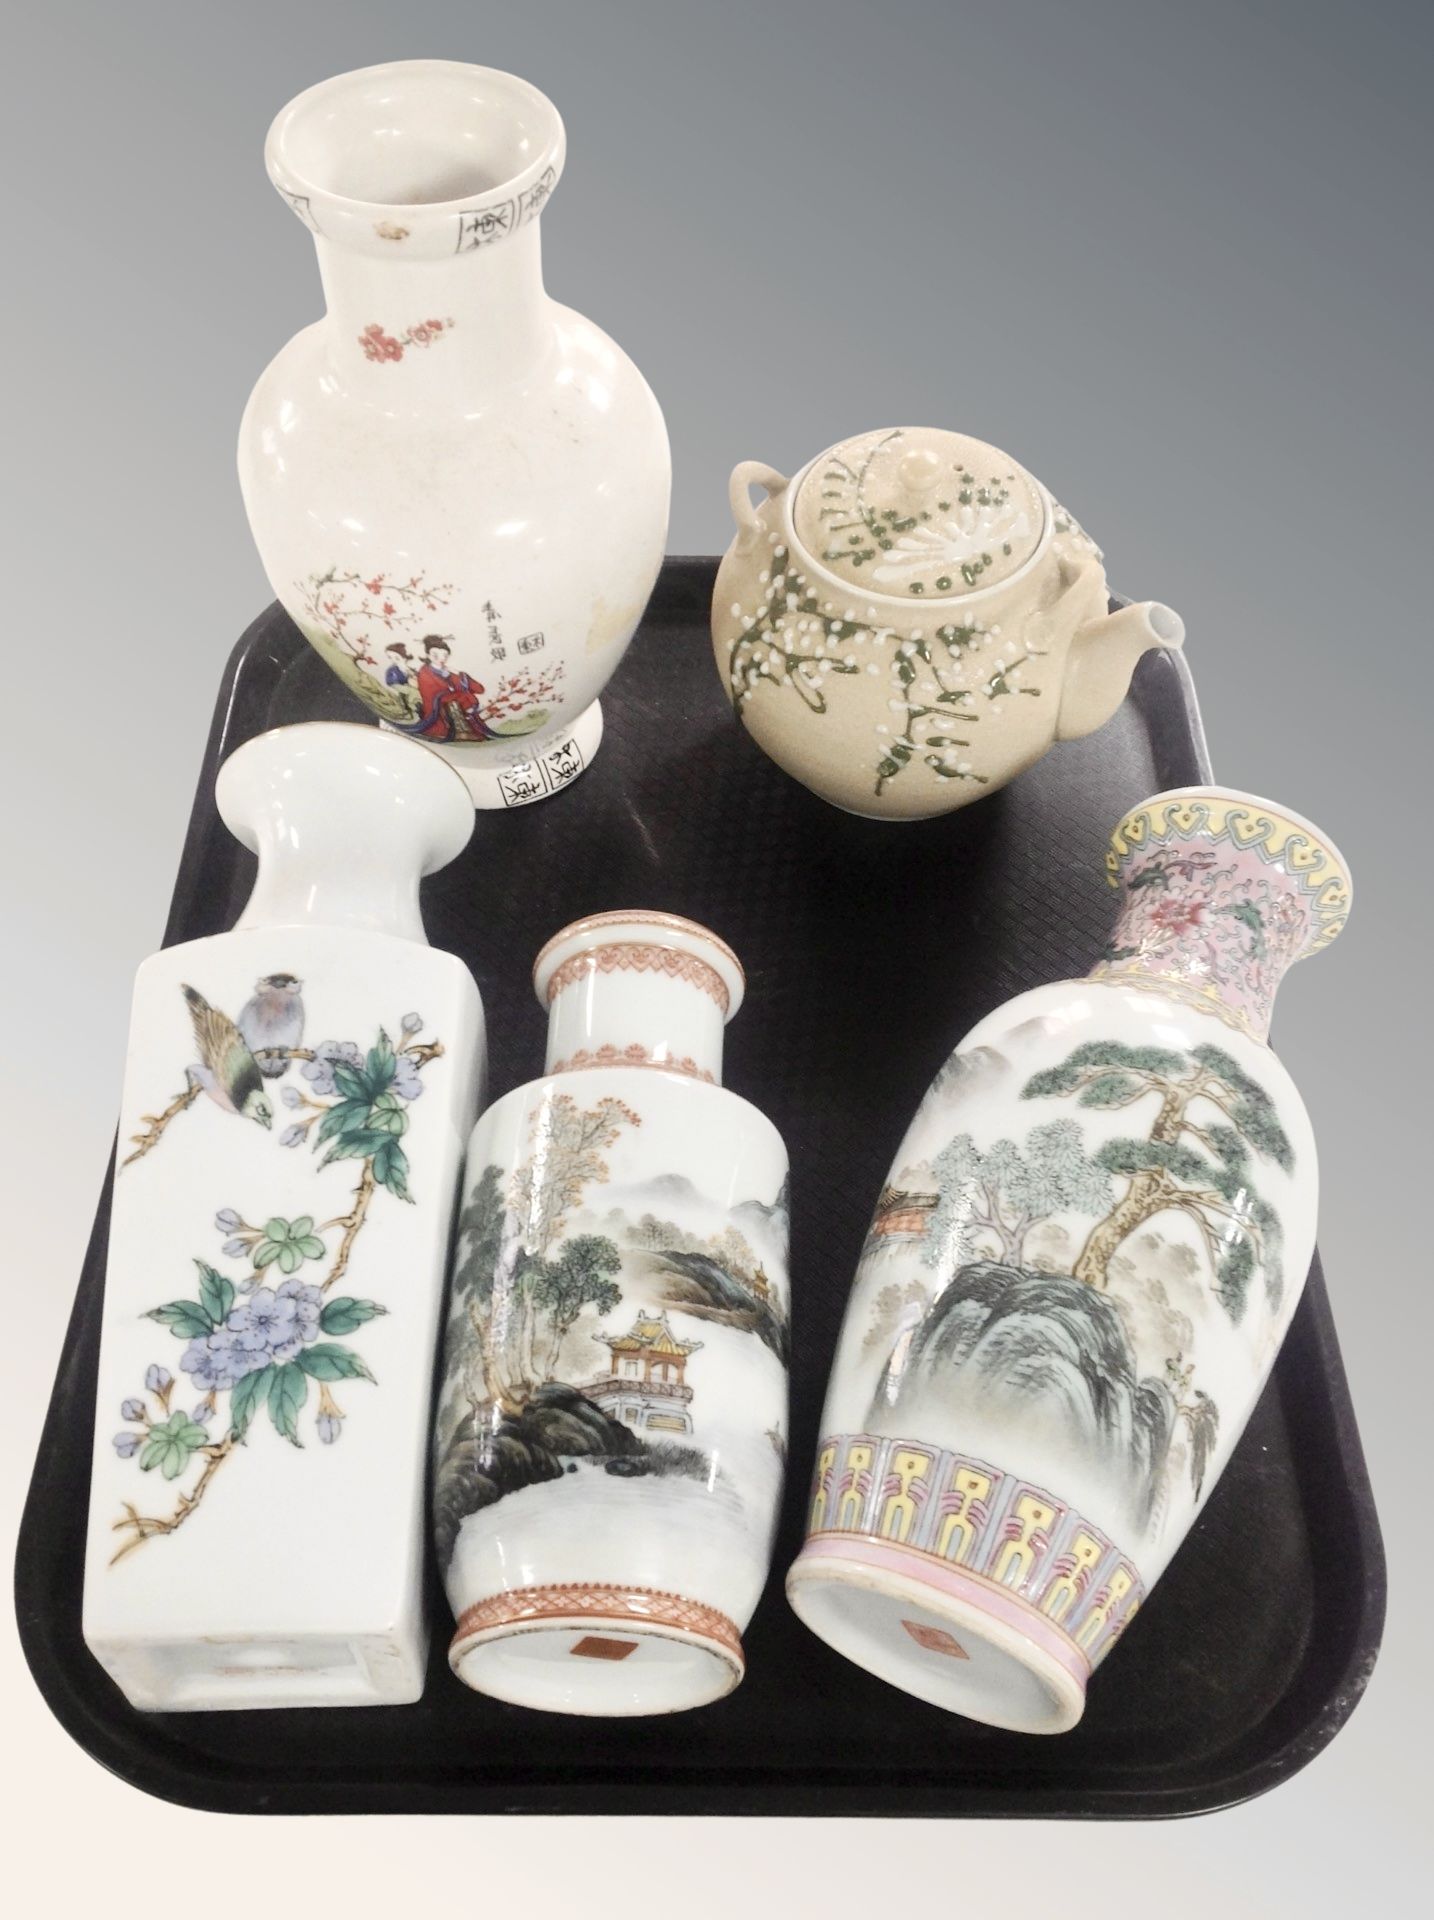 Four 20th century Chinese porcelain baluster vases and earthenware teapot